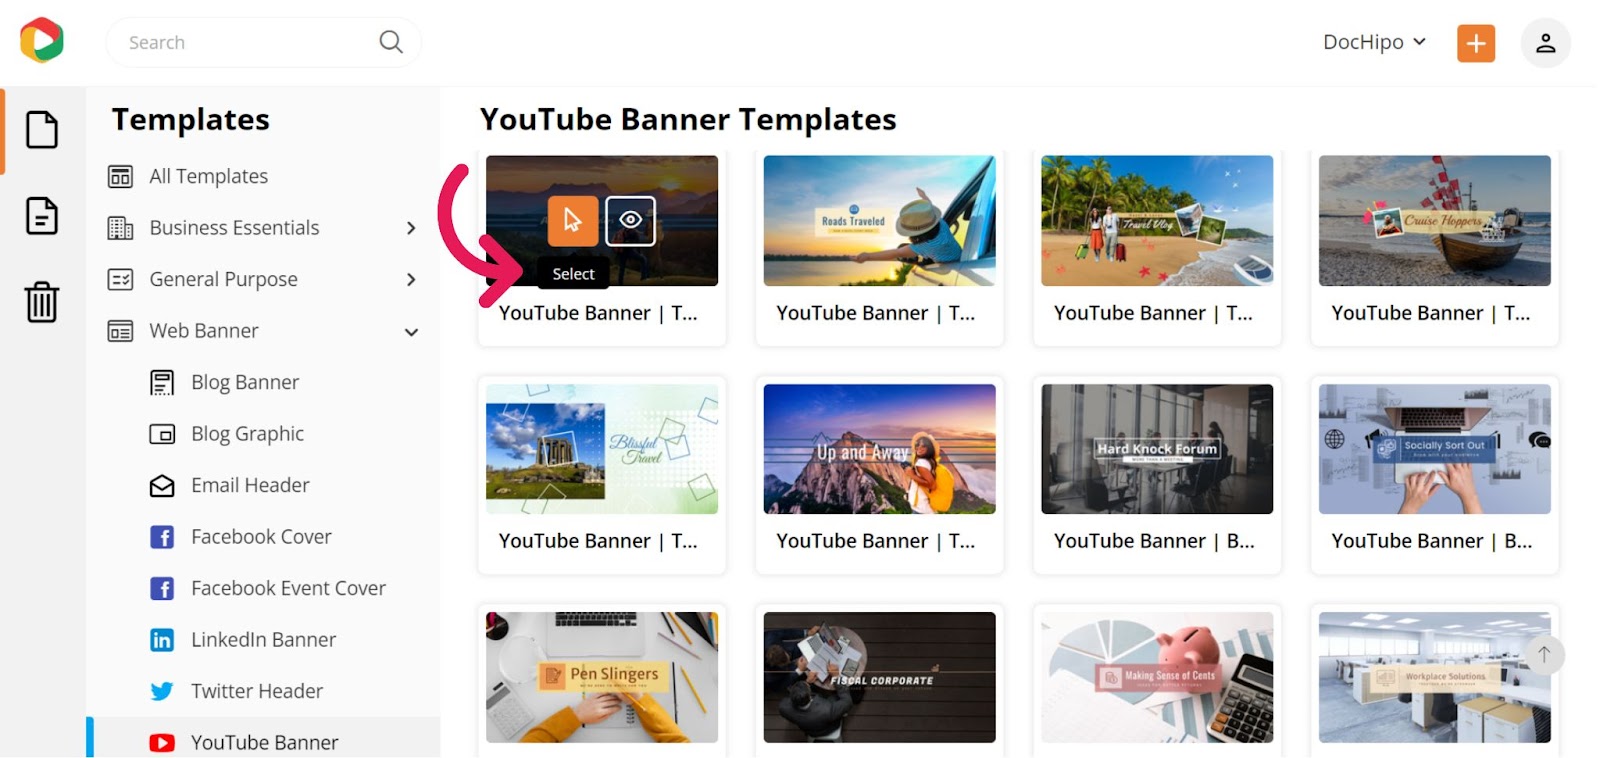 Select Preview YouTube Banner Template